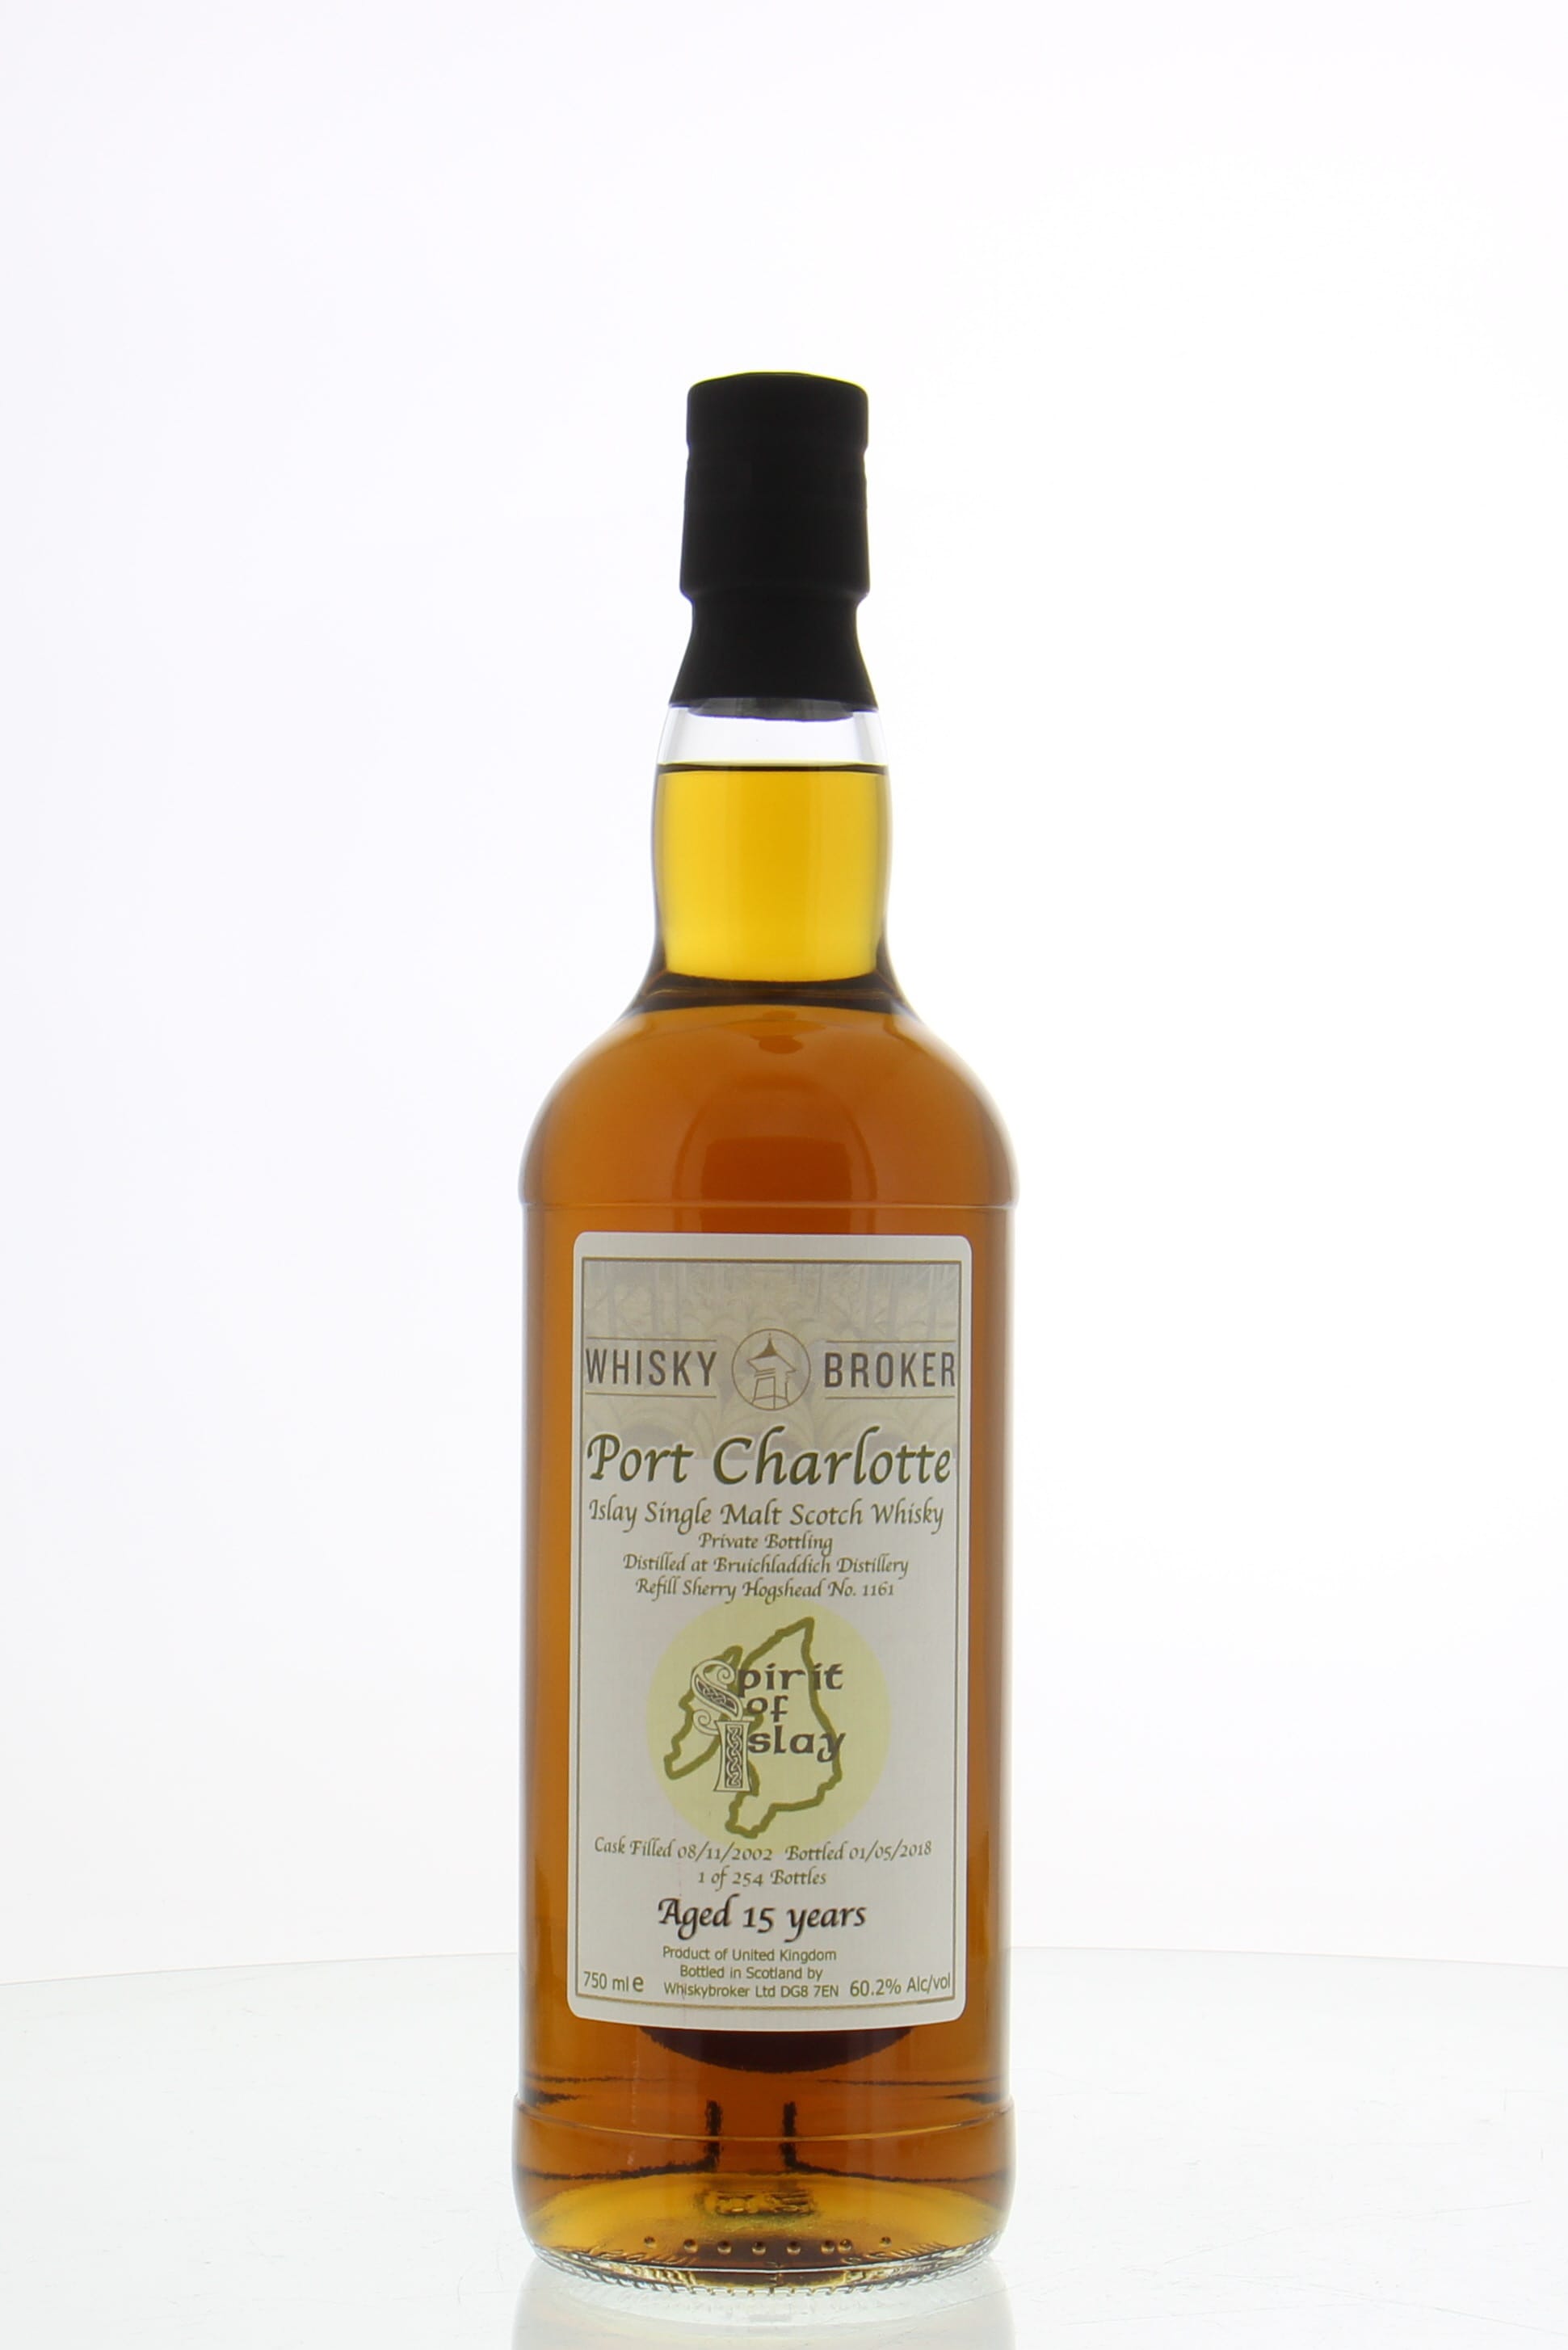 Port Charlotte - 15 Years Old Spirit of Islay Private Bottling Cask 1161 60.2% 2002 NO Original Container Included